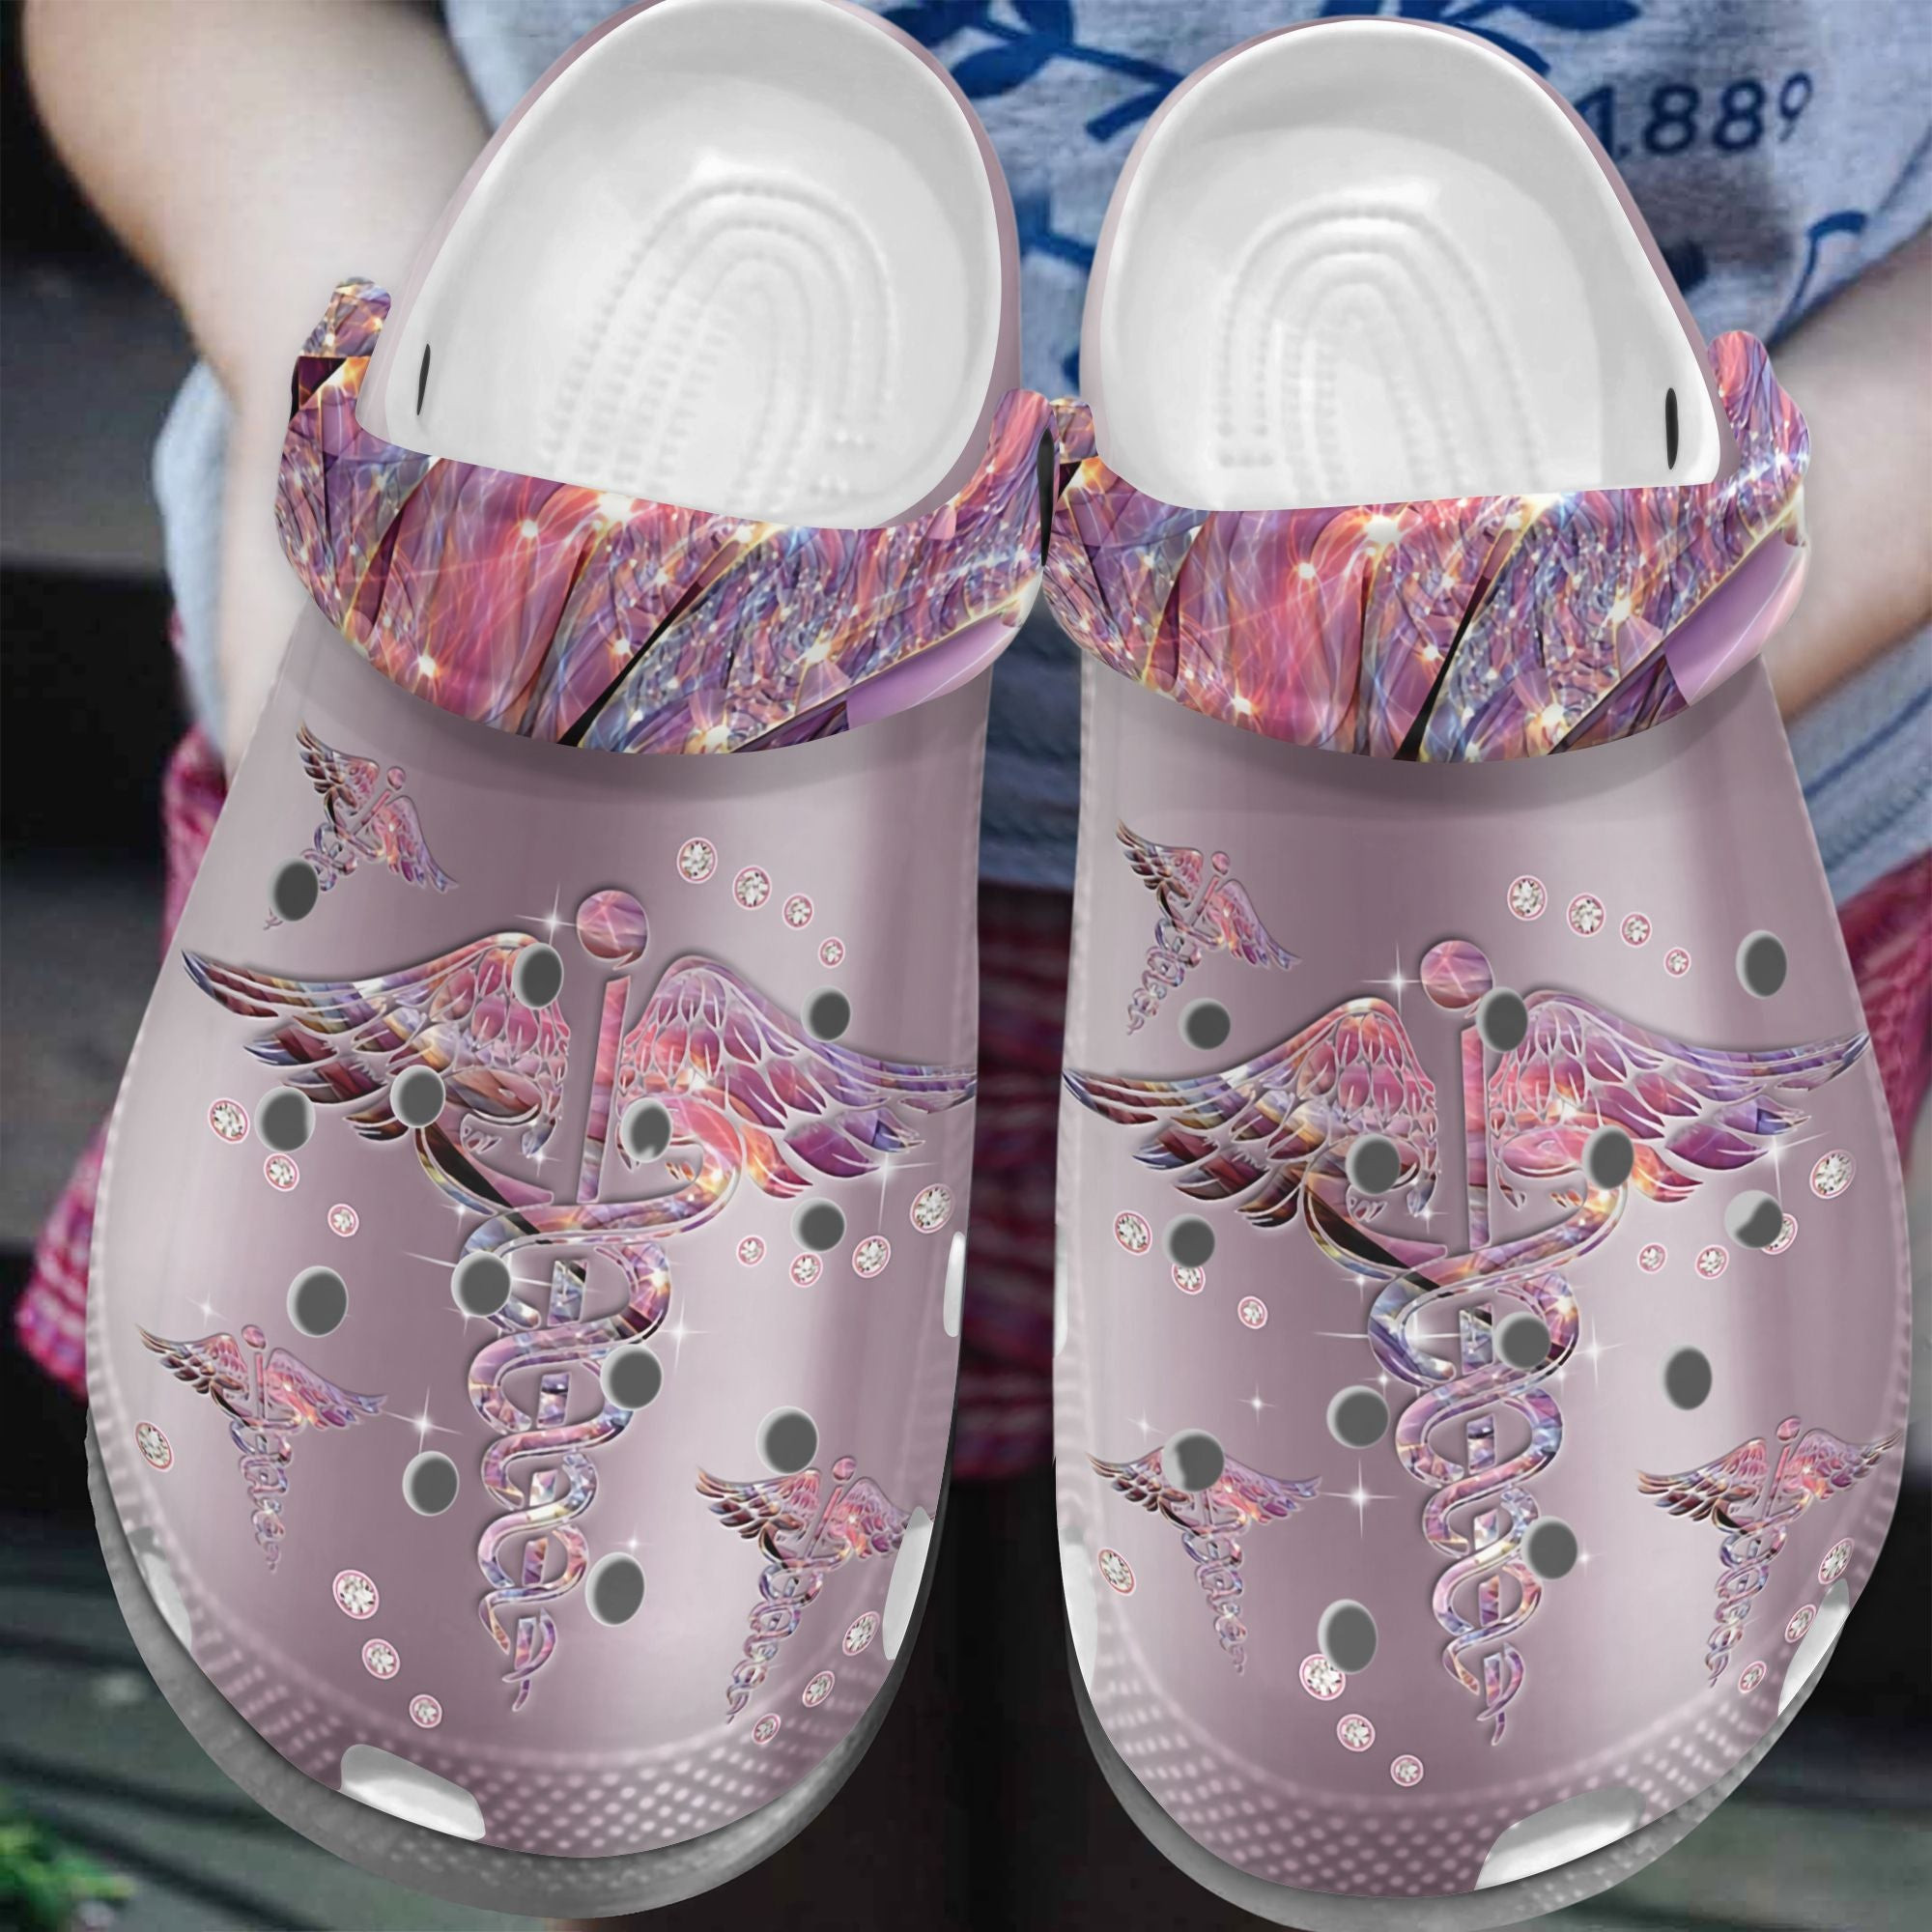 Magical World For Nurse Shoes - Angel Wings Outdoor Shoes Birthday Gift For Women Girl Mother Daughter Sister Friend